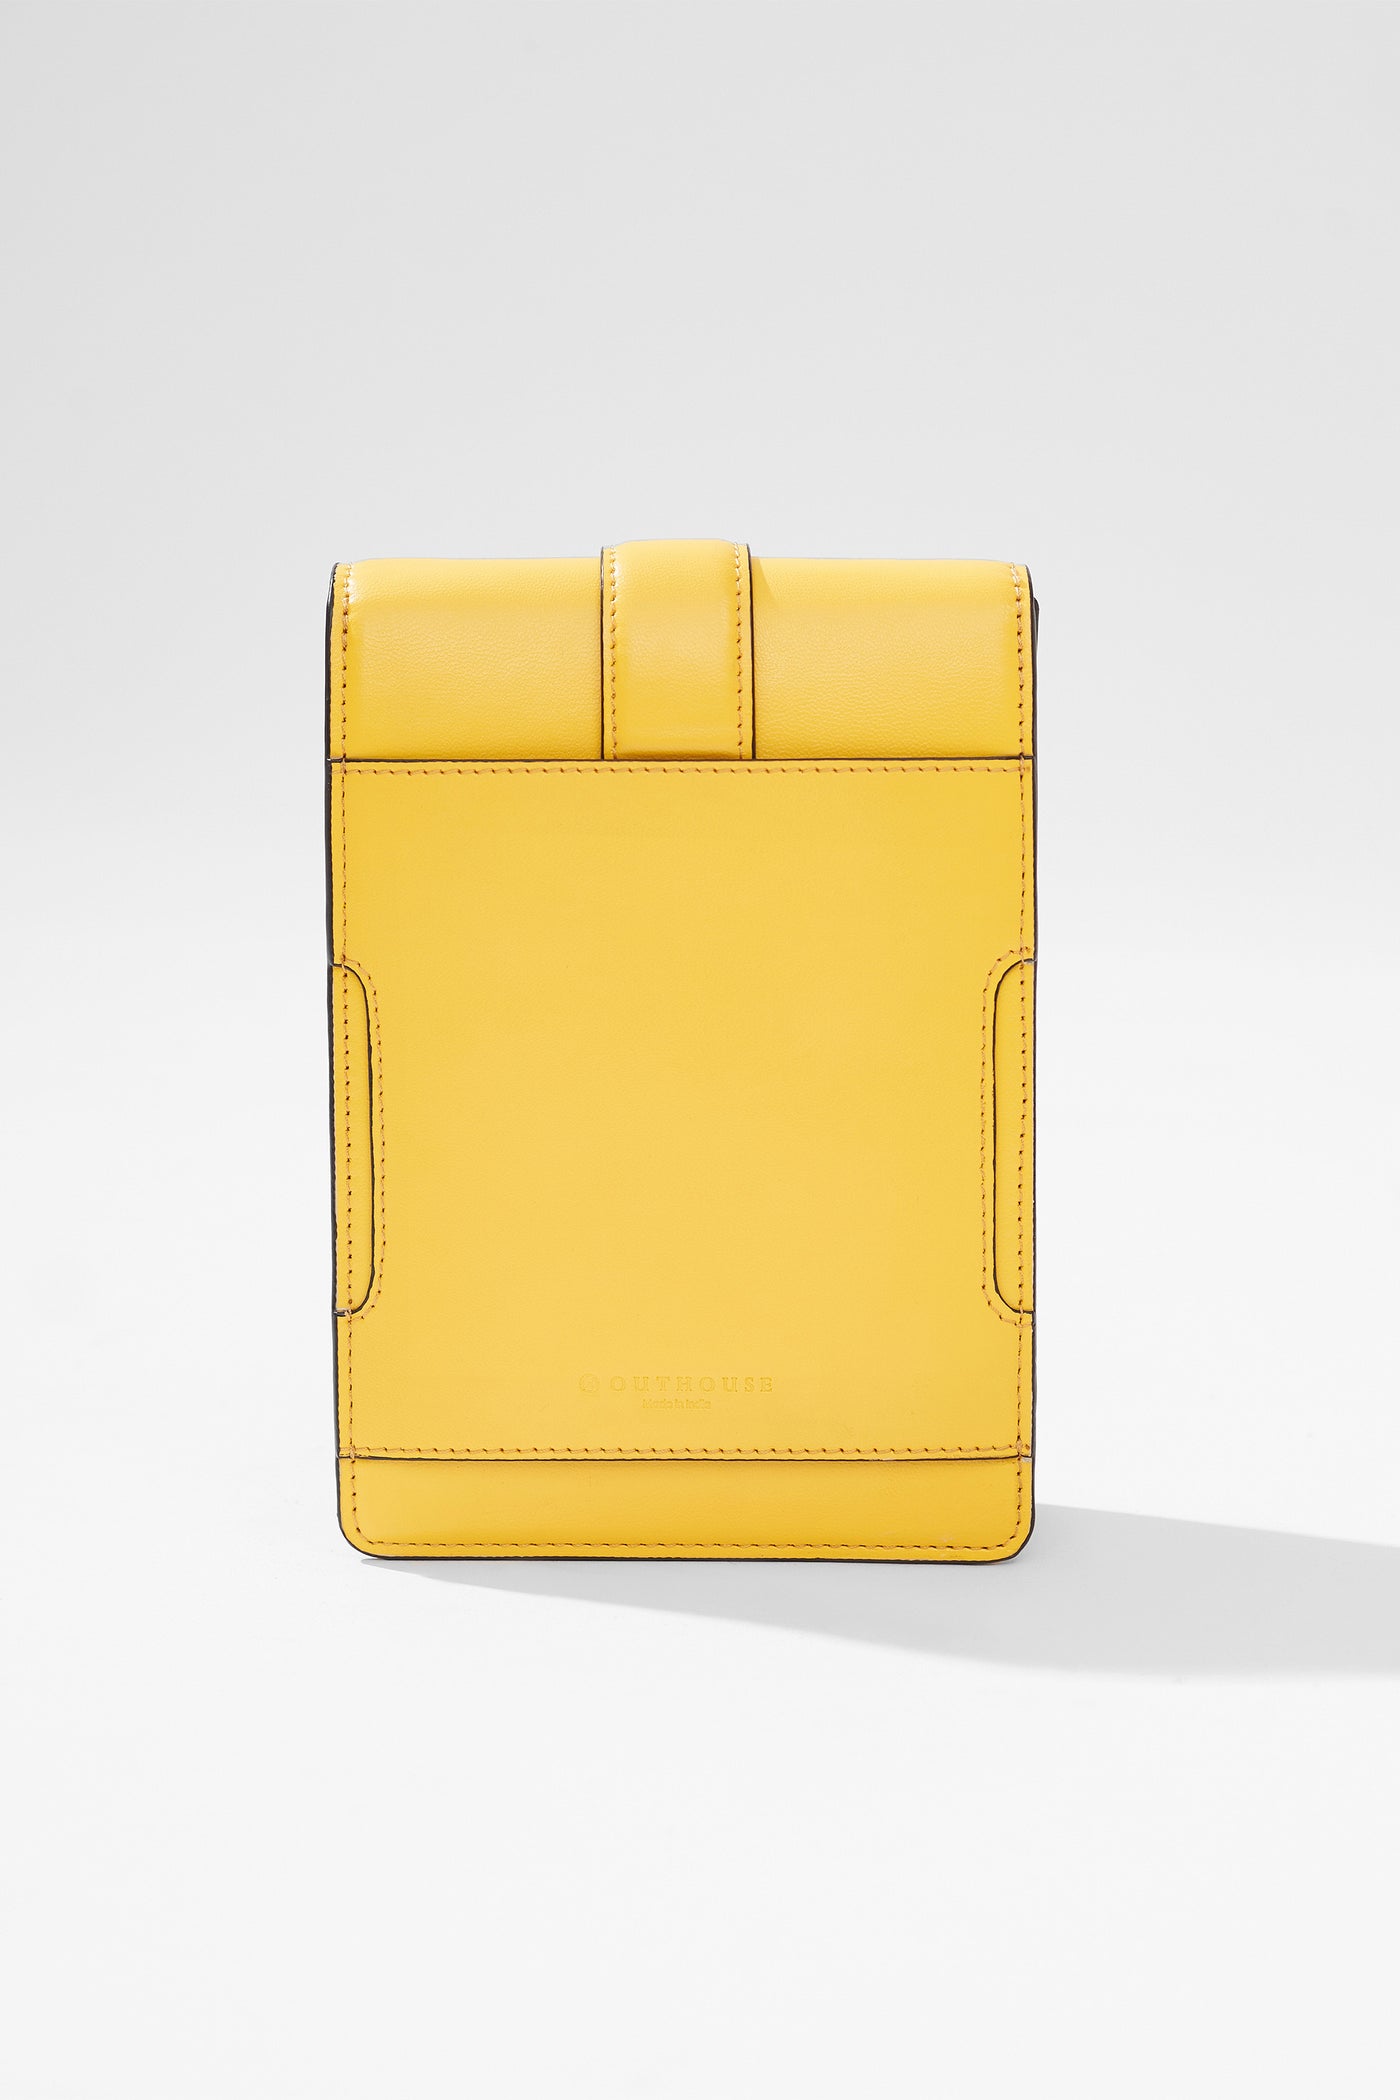 outhouse Dopamine Messenger Bag In Tuscany Yellow bags accessories online shopping melange singapore indian designer wear